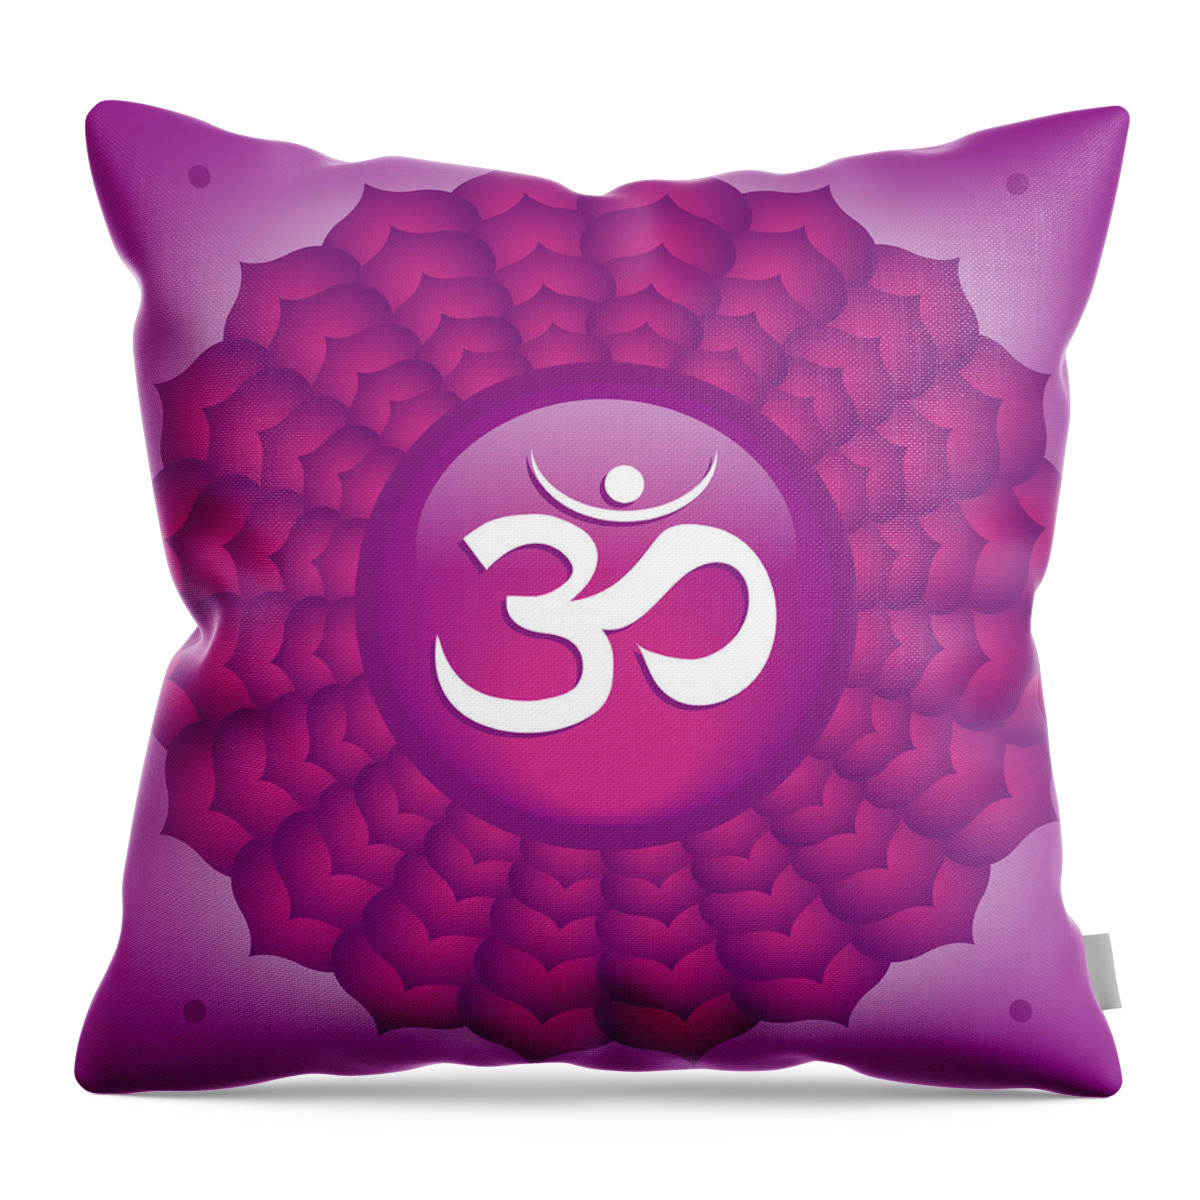 Chakra Throw Pillow featuring the digital art Crown Chakra by Serena King